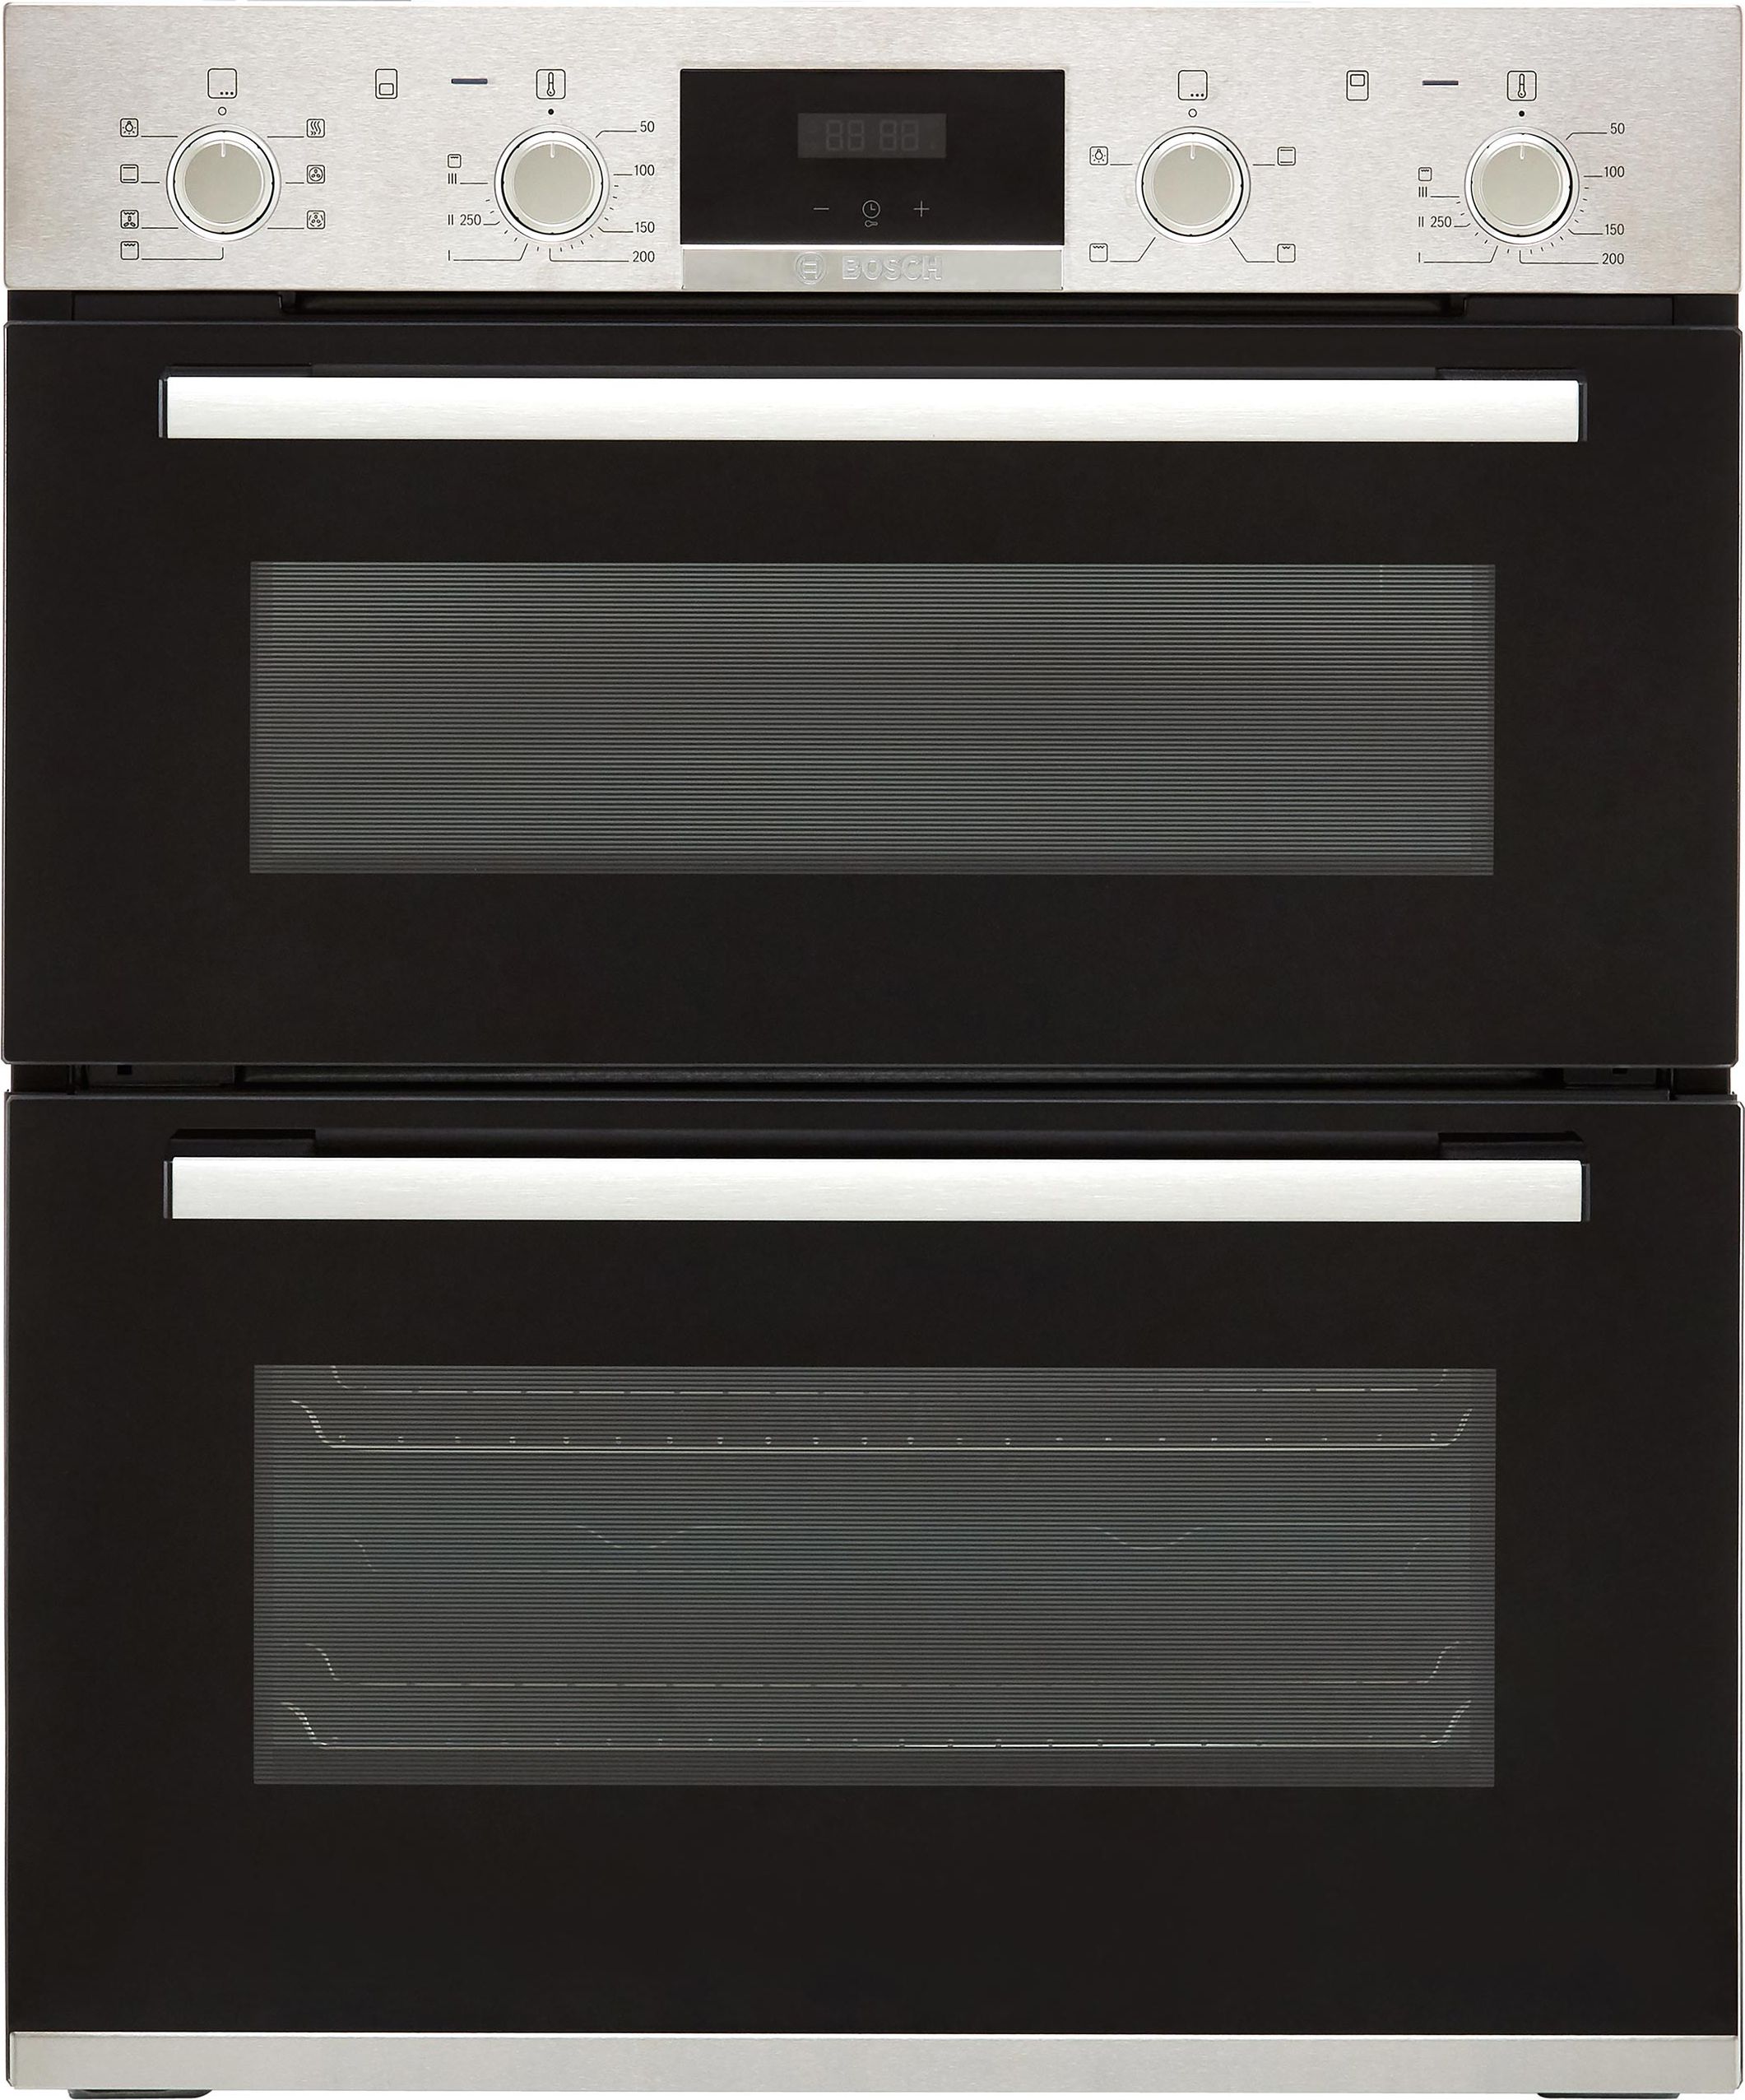 Bosch Series 4 NBS533BS0B Built Under Electric Double Oven - Stainless Steel - A/B Rated, Stainless Steel